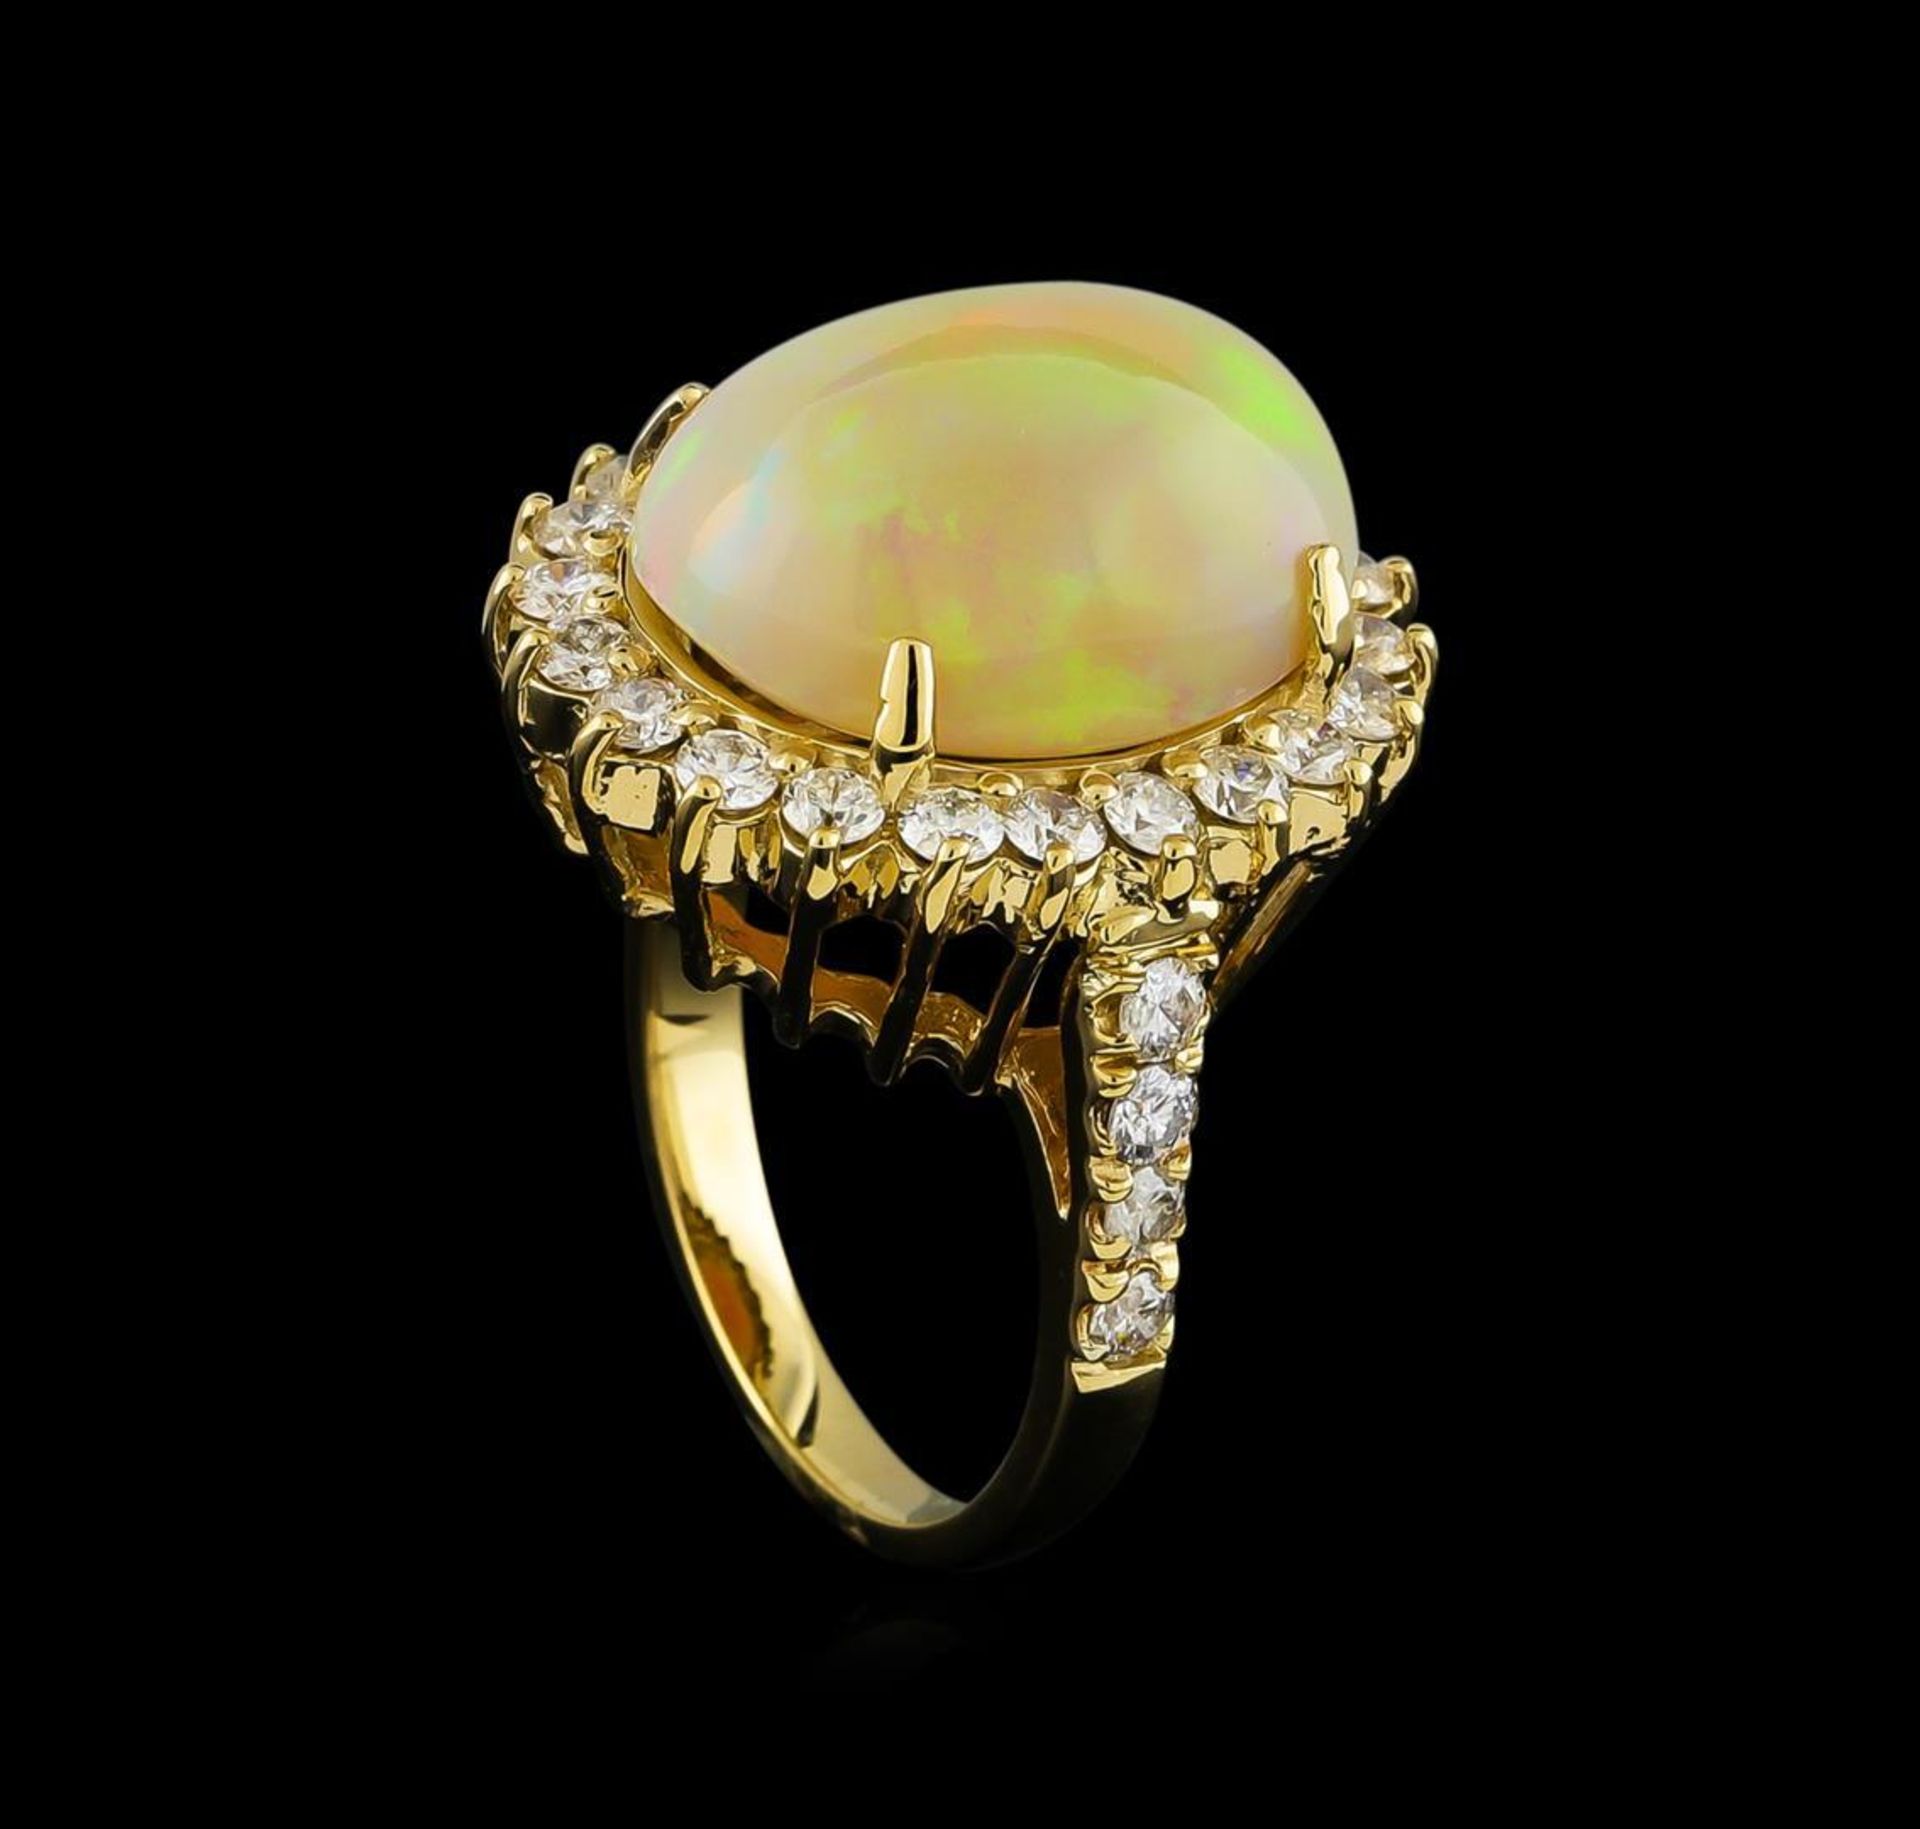 11.30 ctw Opal and Diamond Ring - 14KT Yellow Gold - Image 4 of 5